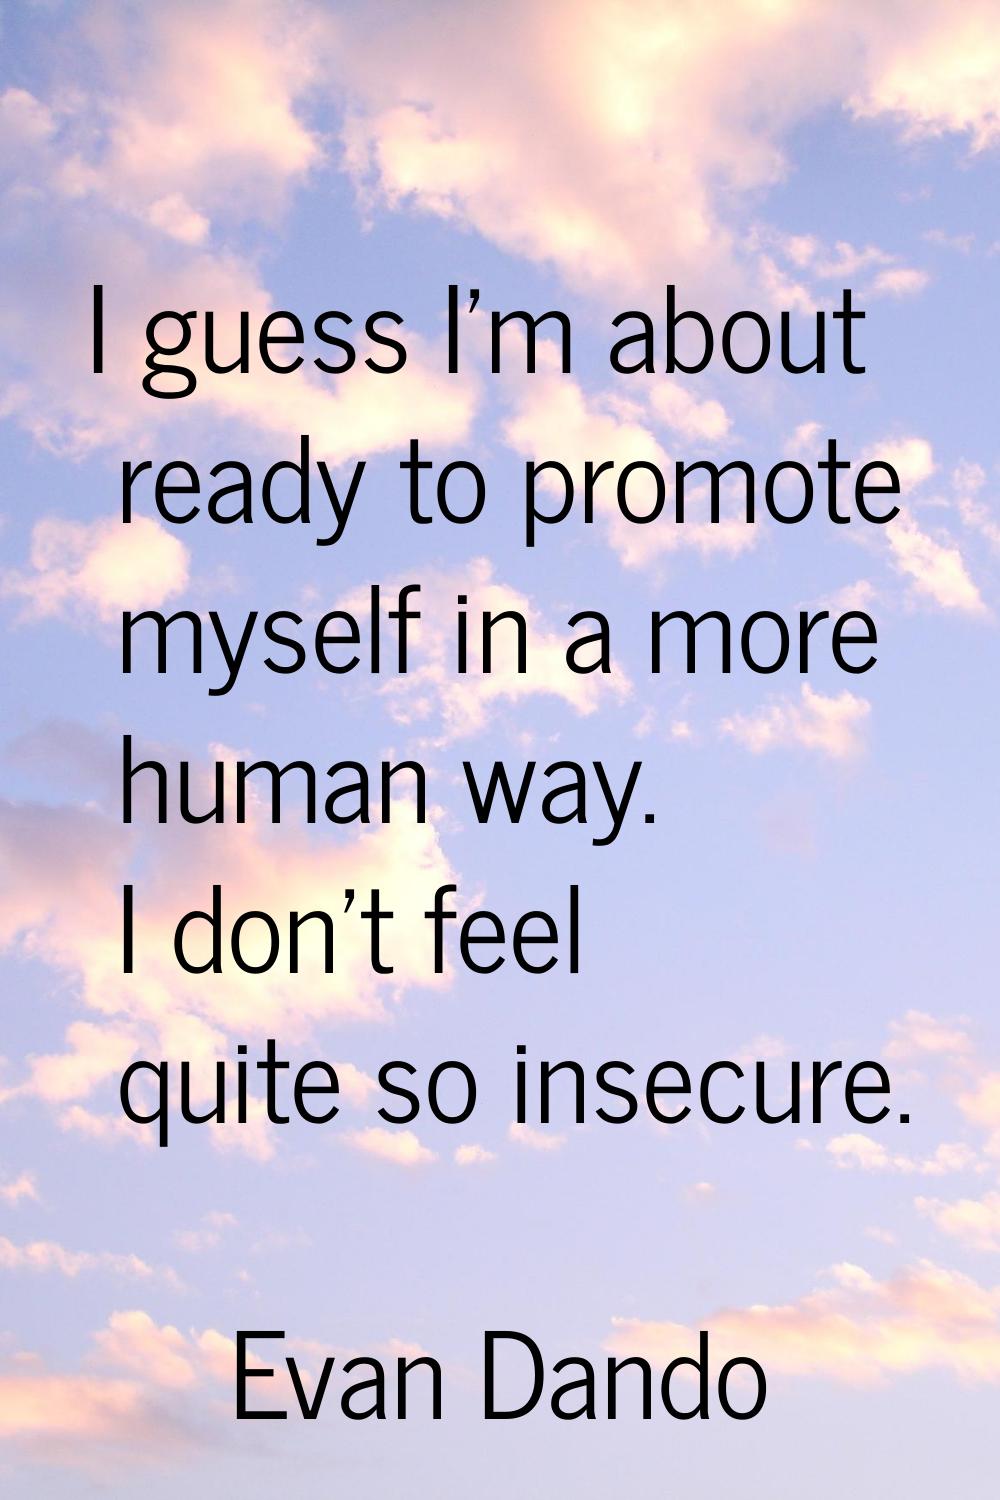 I guess I'm about ready to promote myself in a more human way. I don't feel quite so insecure.